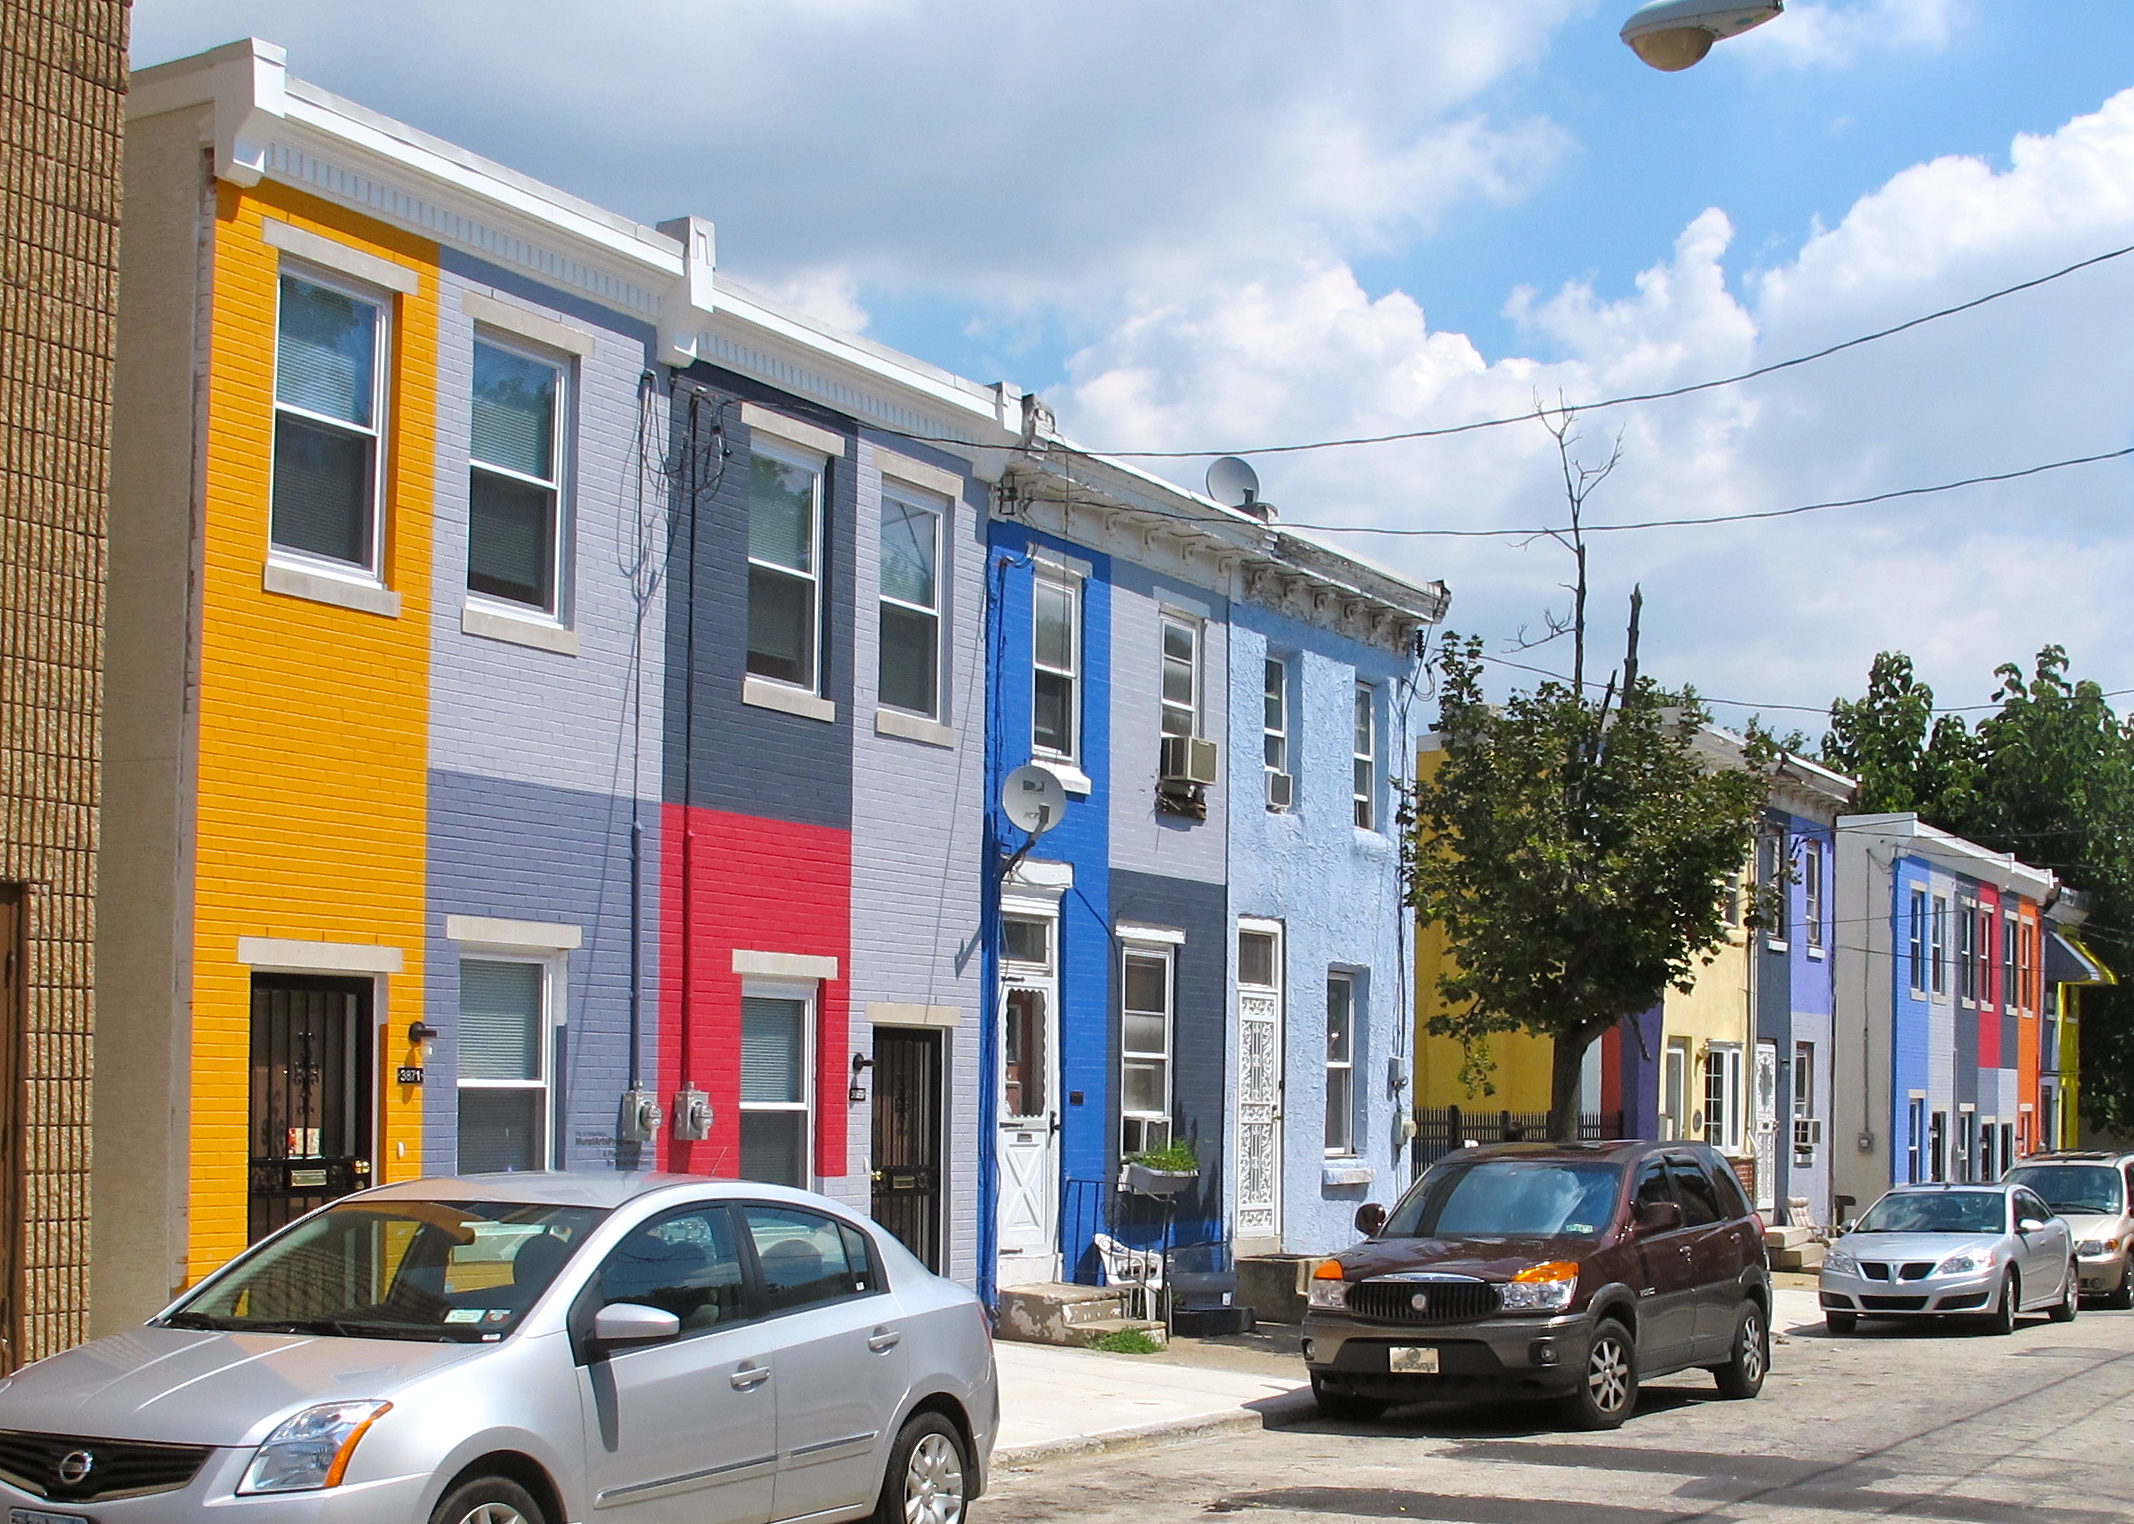 As part of its project A Place to Call Home, the Mural Arts Project painted the facades of the more than 30 homes on the 3800 block of Melon Street.